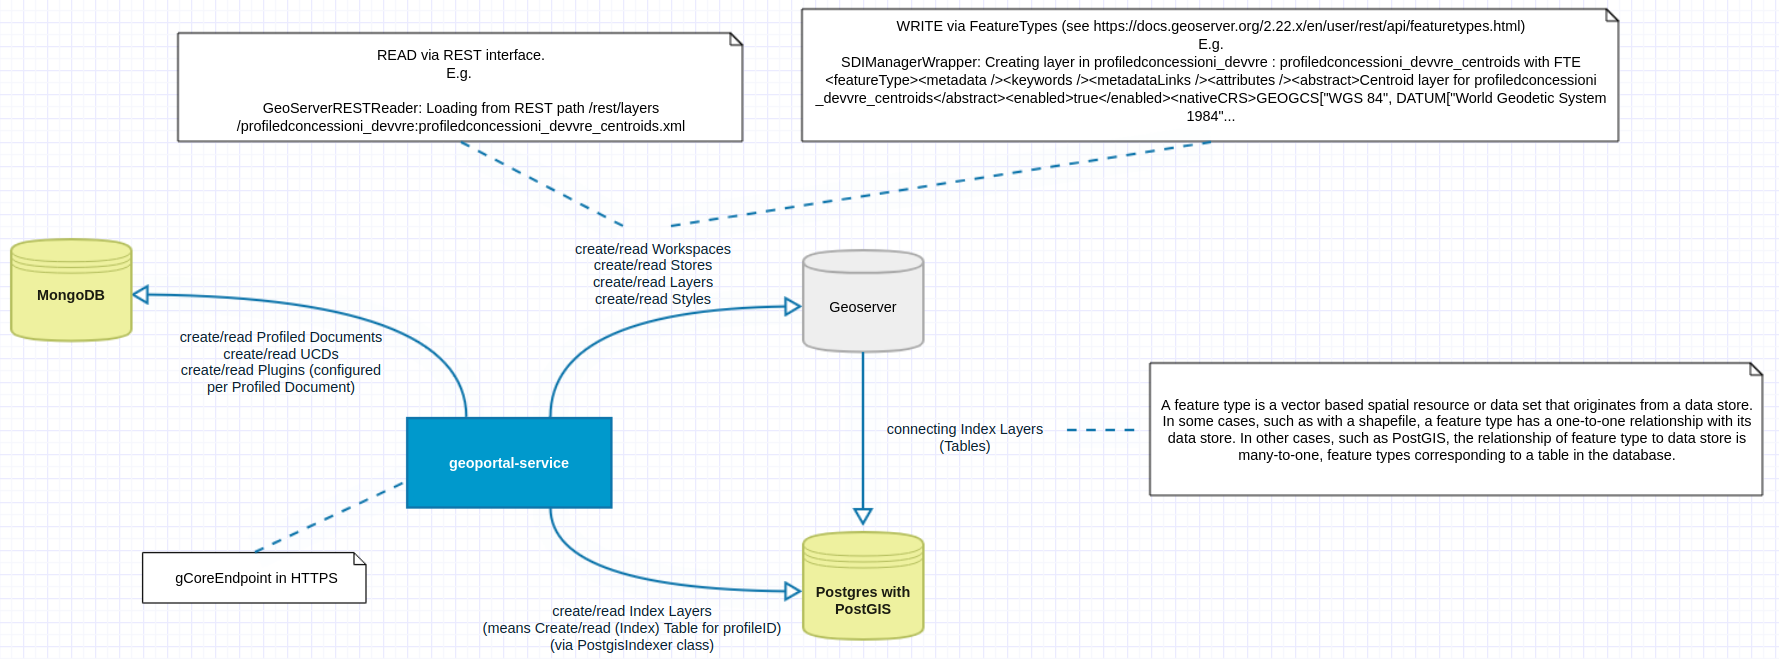 Geoportal-Service Workflow and Interactions with Engines.png